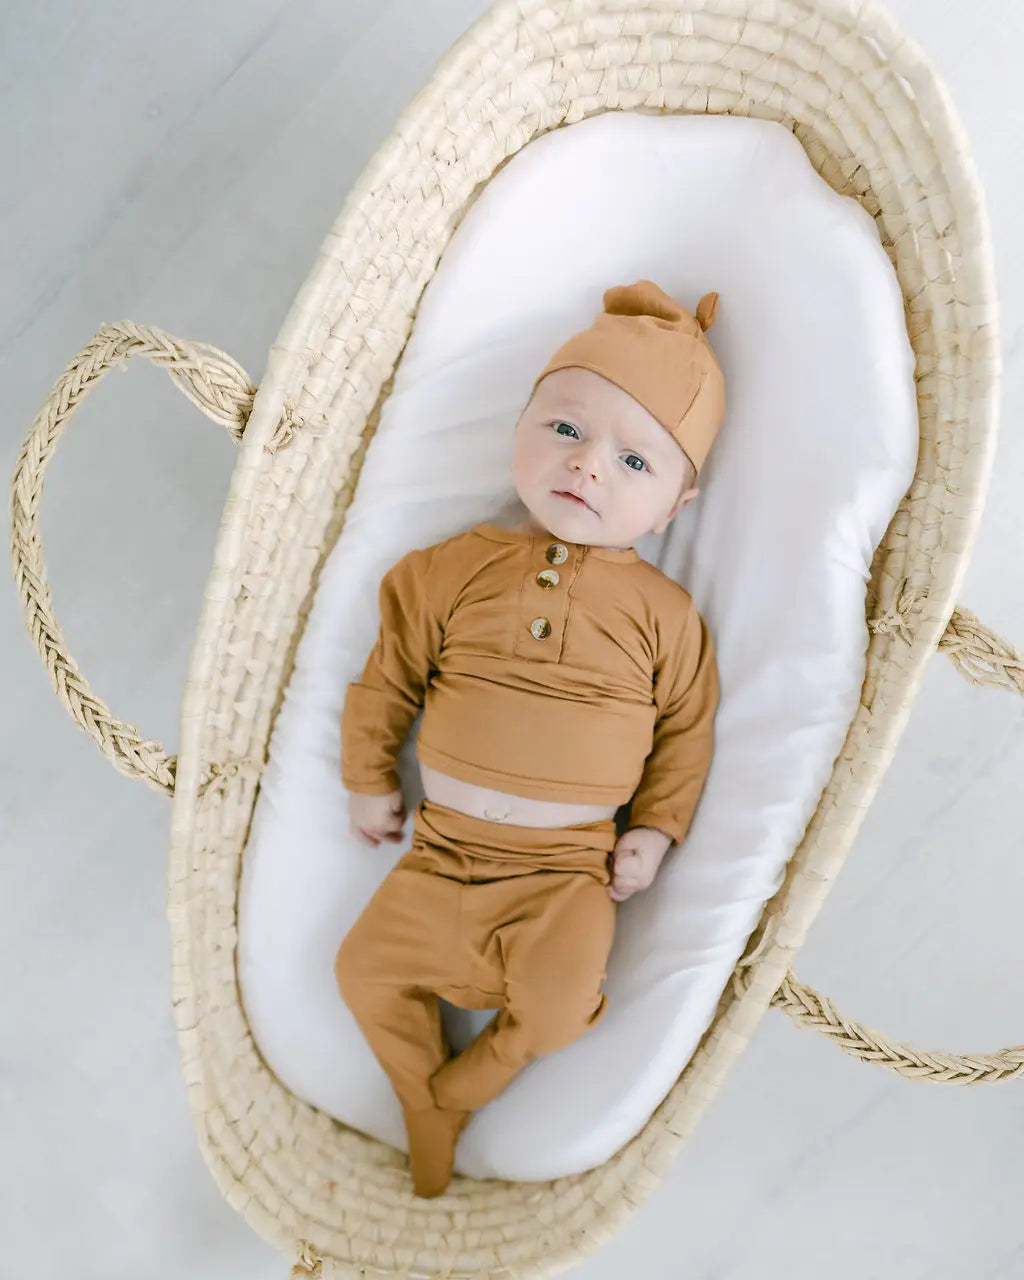 baby in camel colored outfit with hat